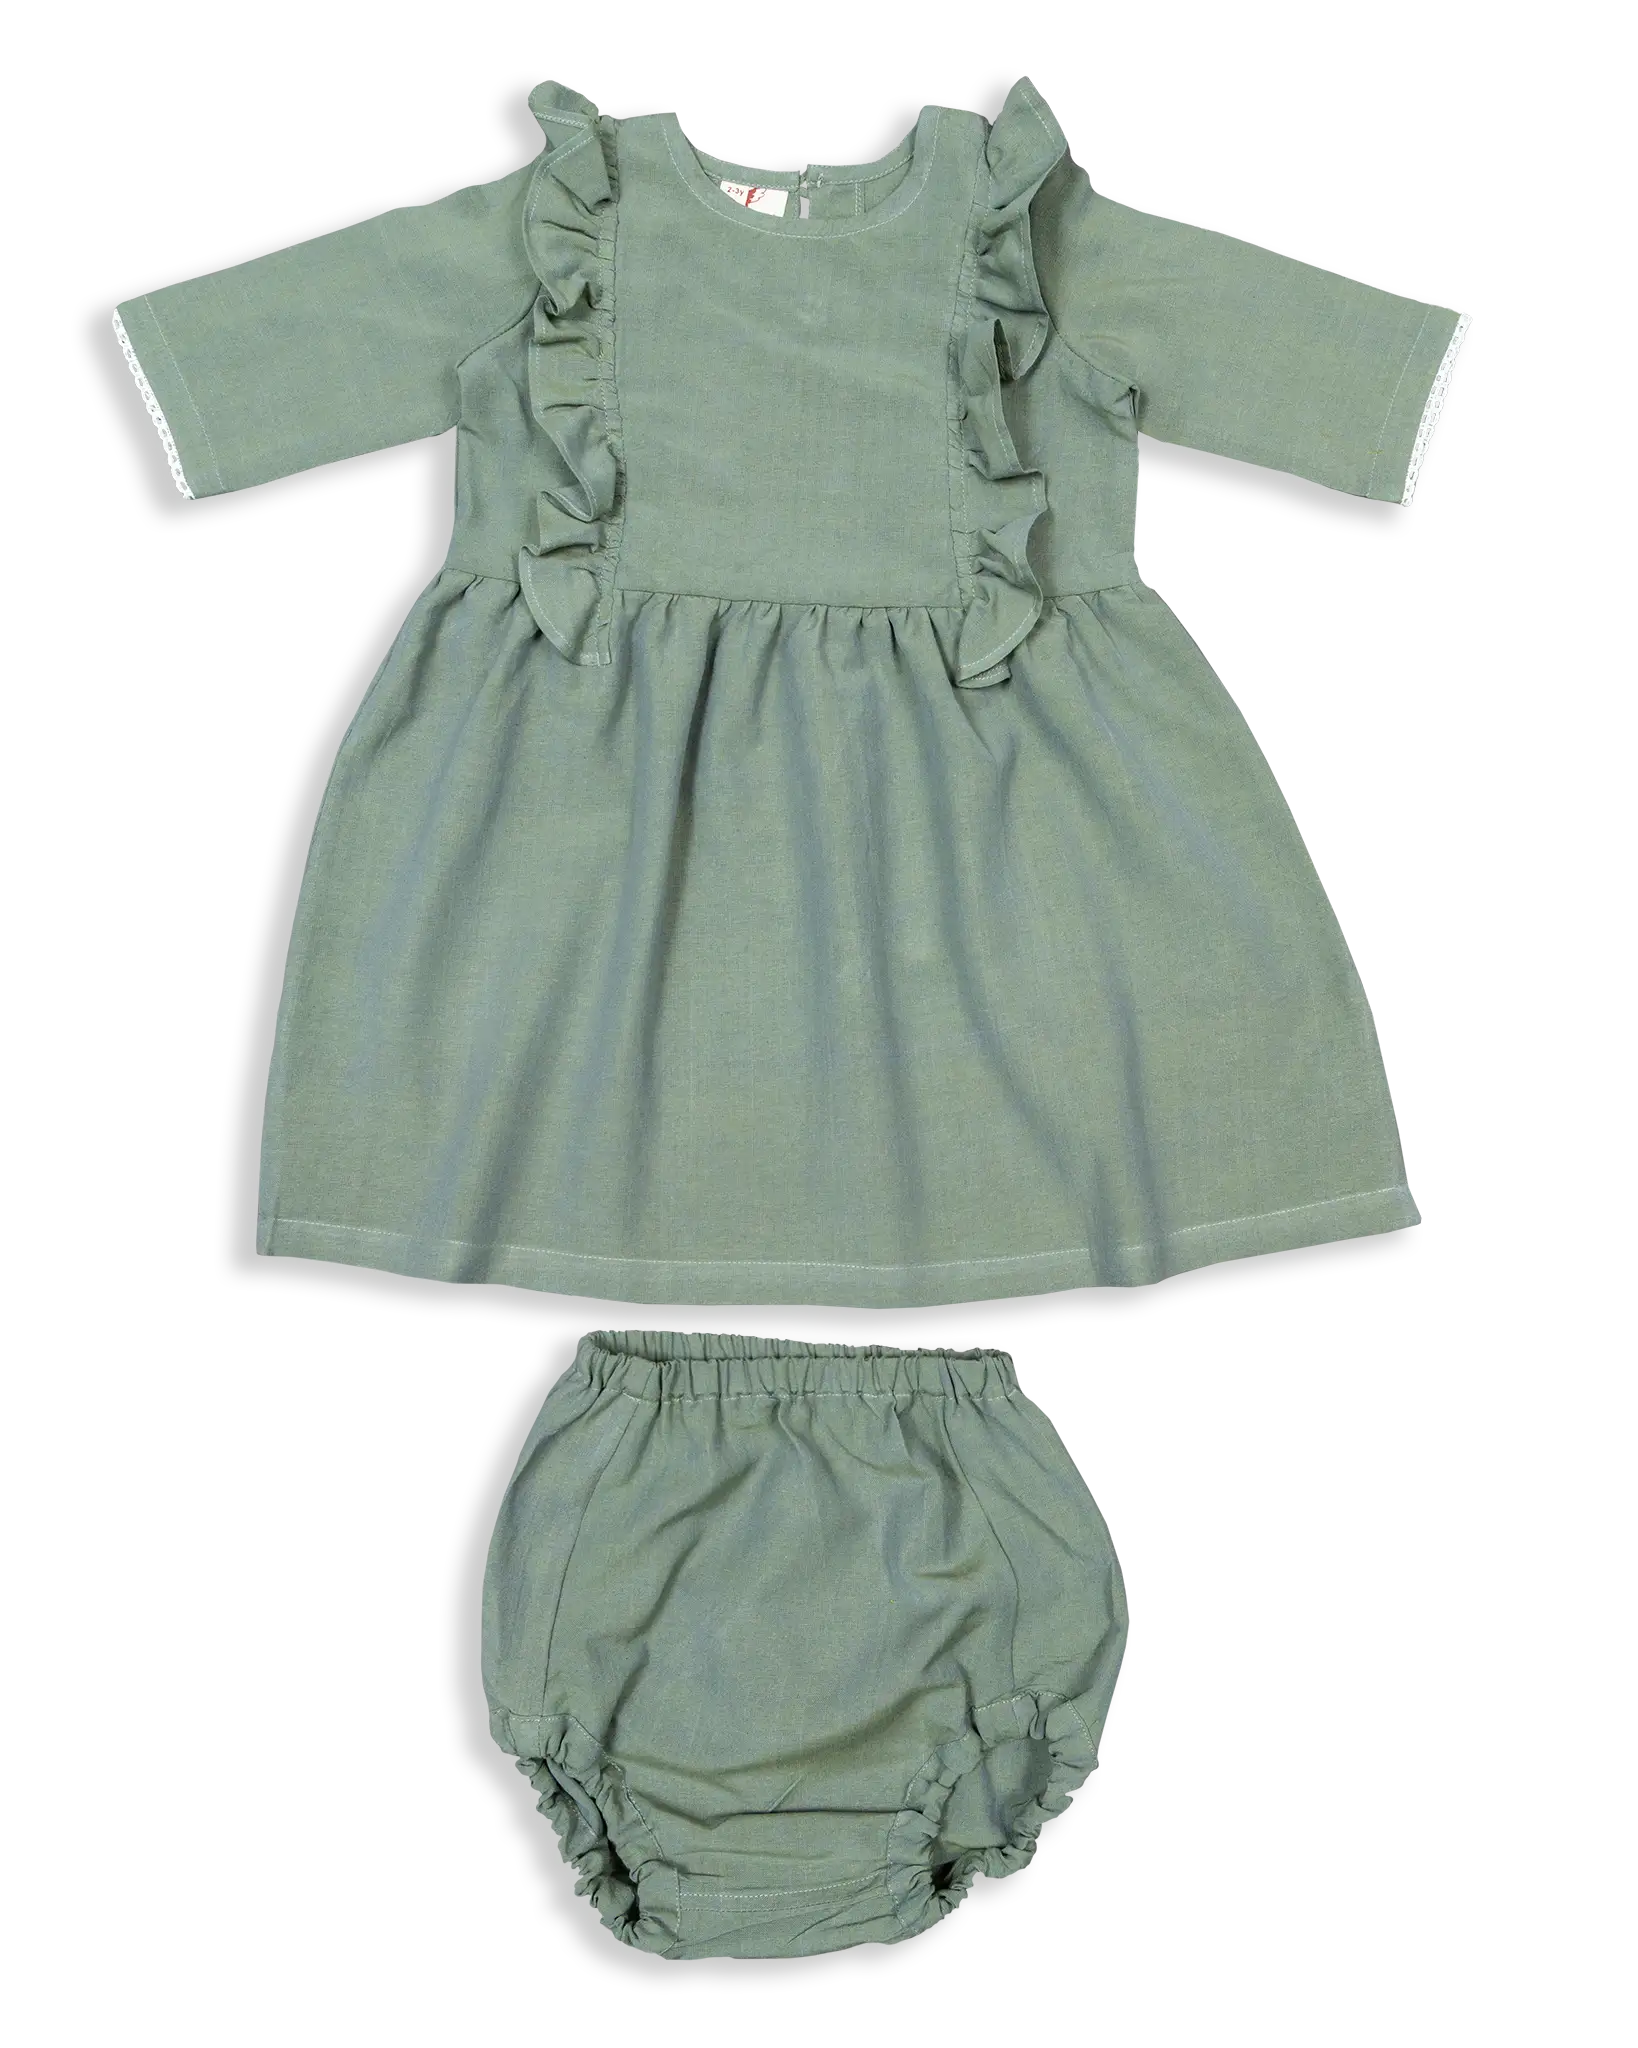 Make her twinkle in the Forget-Me-Not Dress! Our gorgeous dress is made with 100% cotton and lace detail at the sleeves, and a ruffle in front that will make her look extra special. Plus, the bloomer will give her a little extra coverage and comfort. Get her this adorably stylish dress today and let your little one shine!